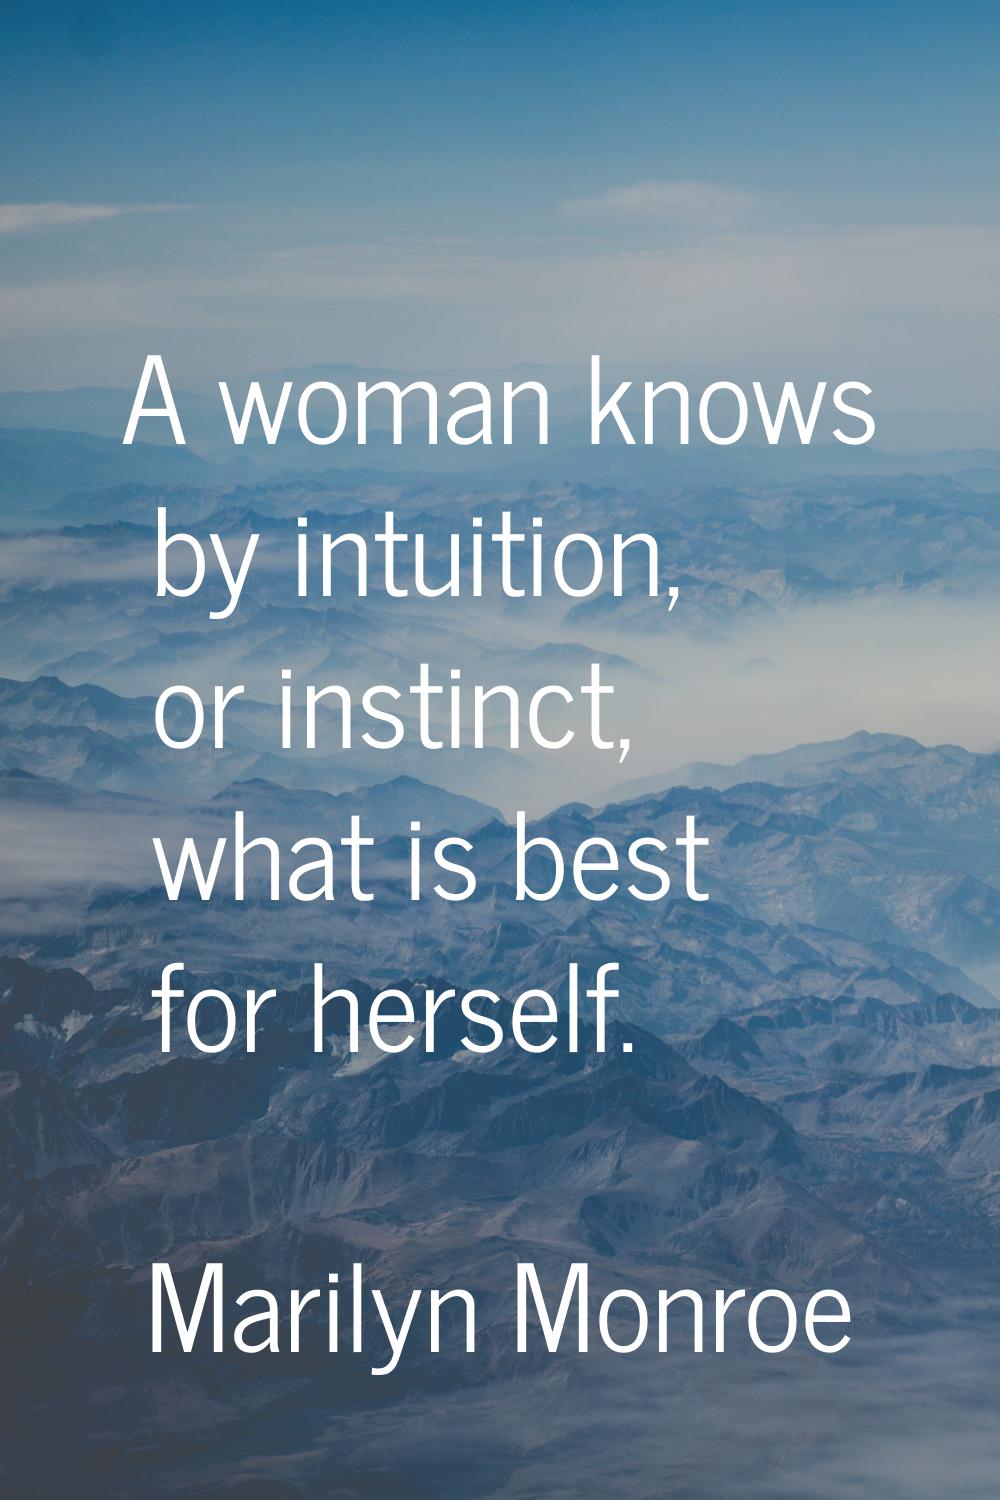 A woman knows by intuition, or instinct, what is best for herself.